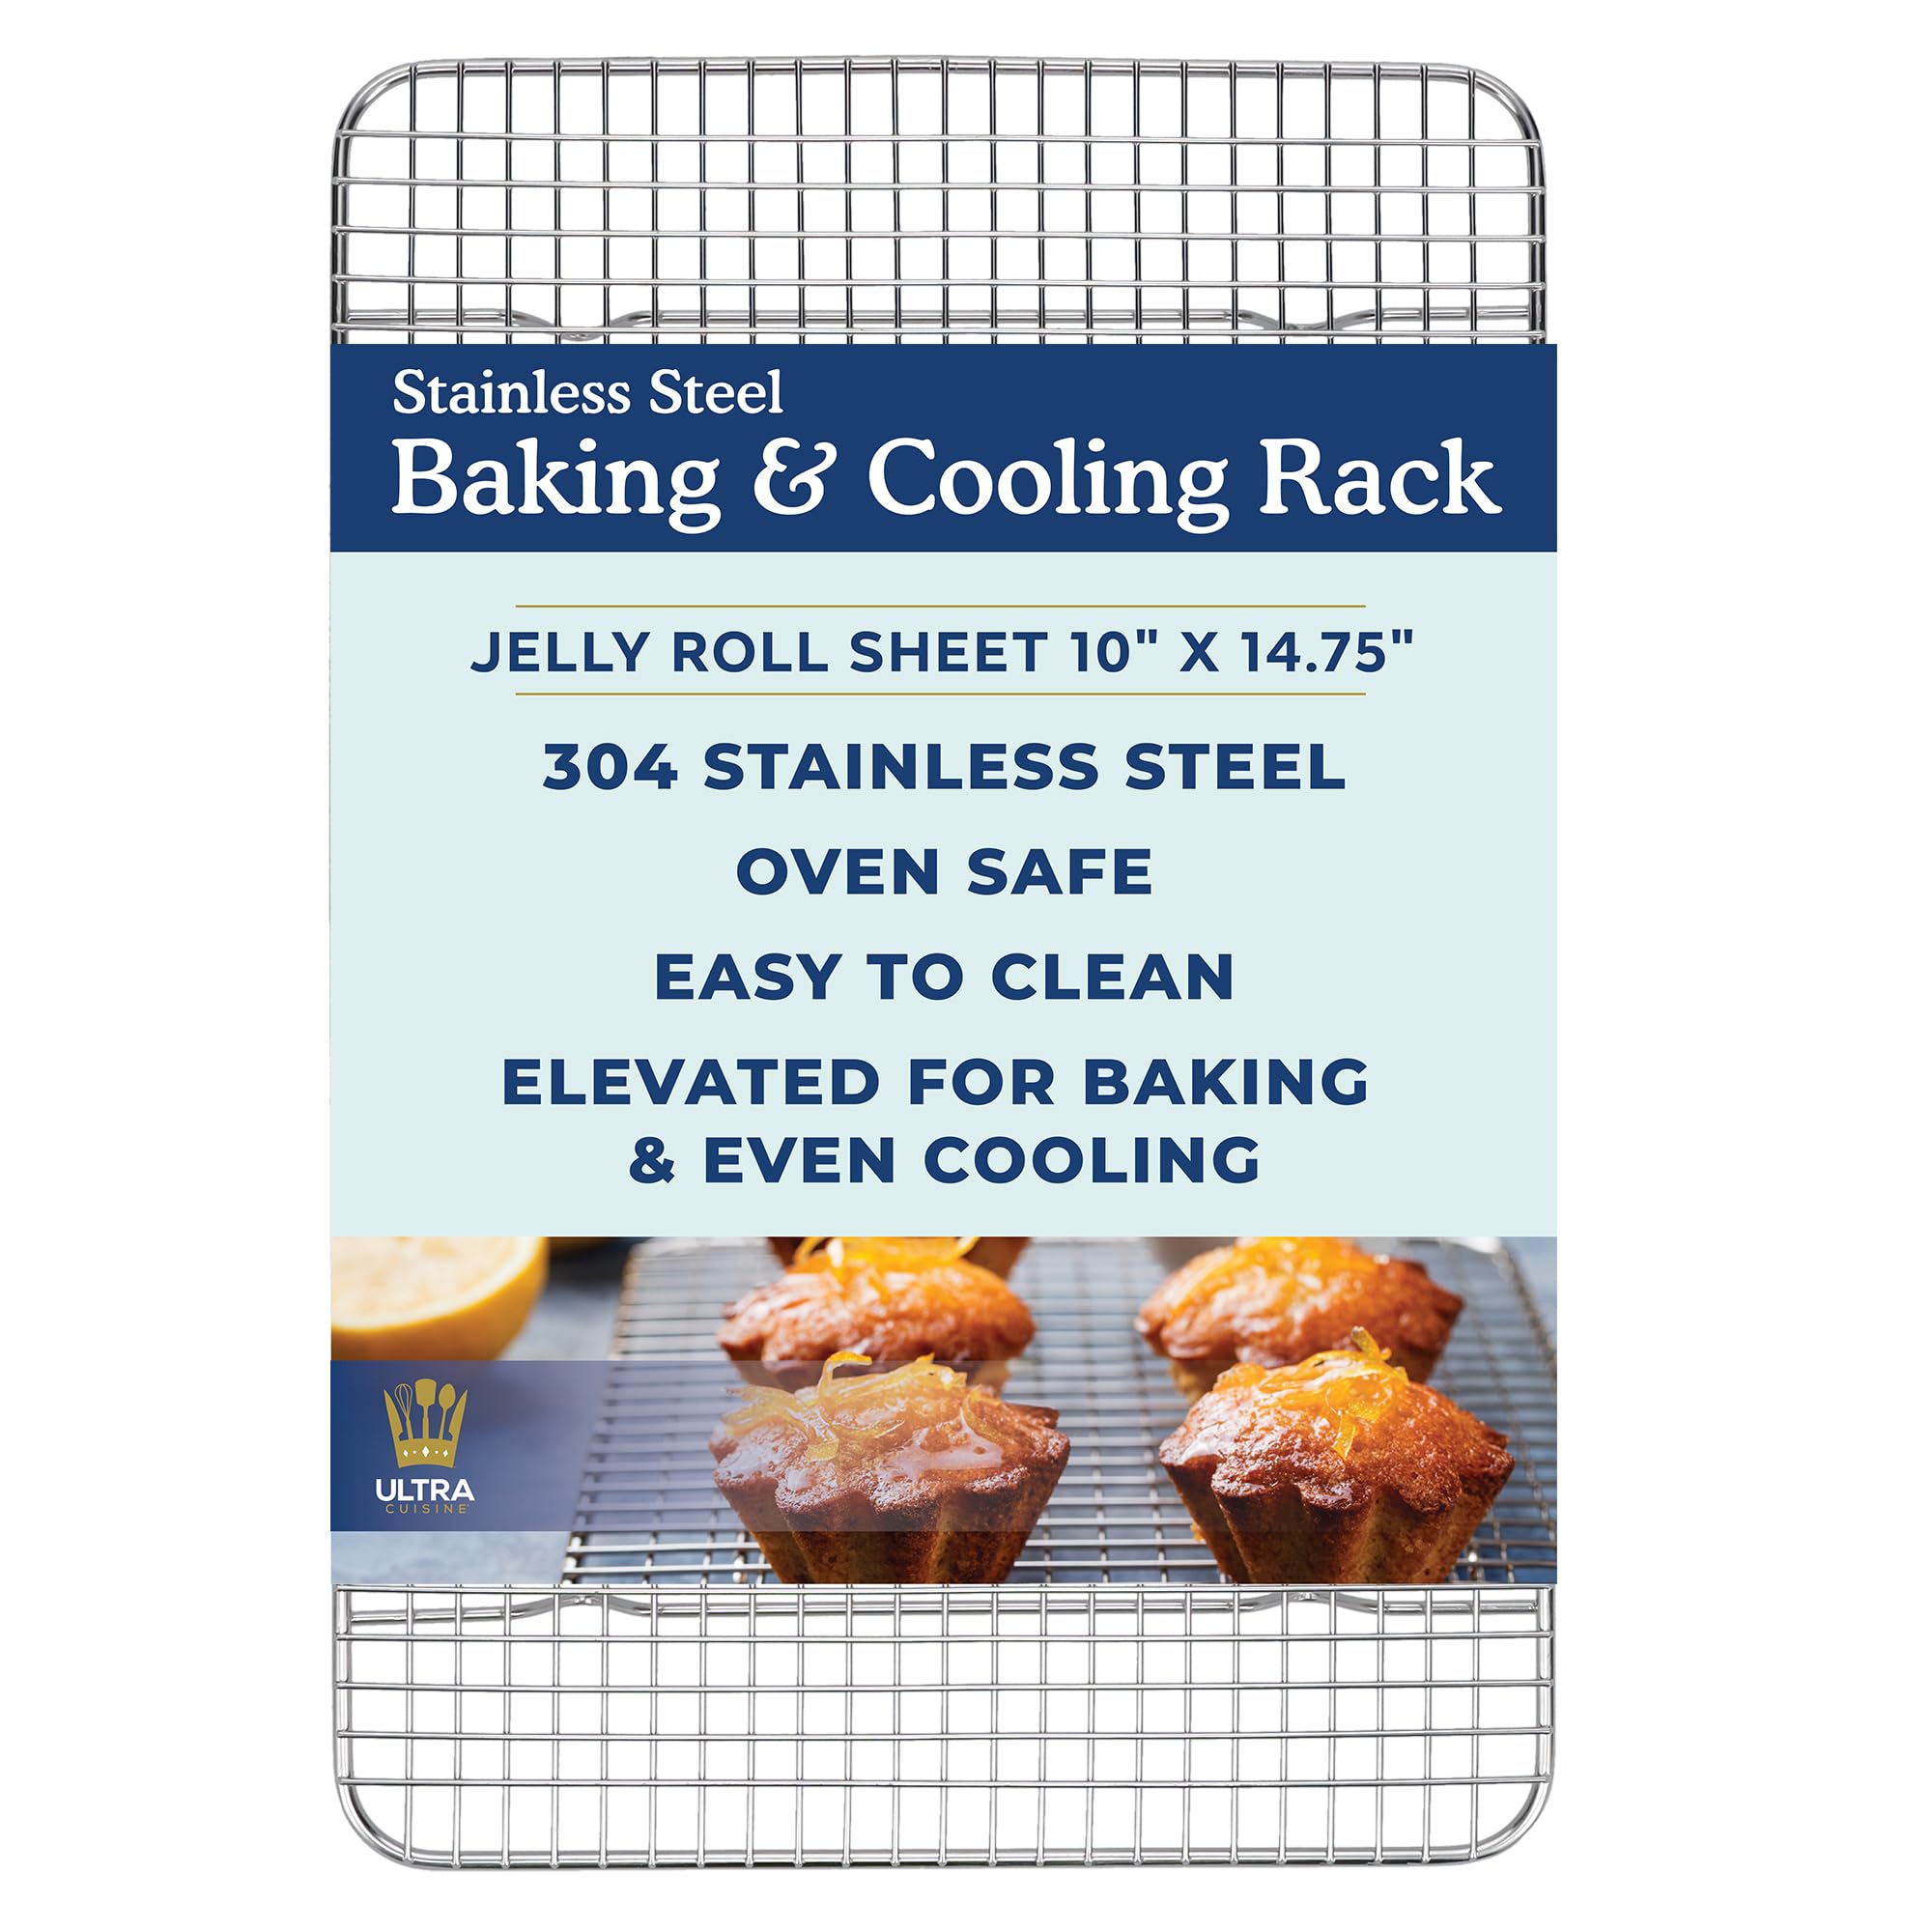 Ultra Cuisine Stainless Steel Baking Rack - 10x14.75 inch Jelly Roll Pan Rack - Grill Rack - Baking Sheet - Oven Safe - Dishwasher Safe - Heavy Duty Wire Cooling Rack for Cooking Baking and Roasting